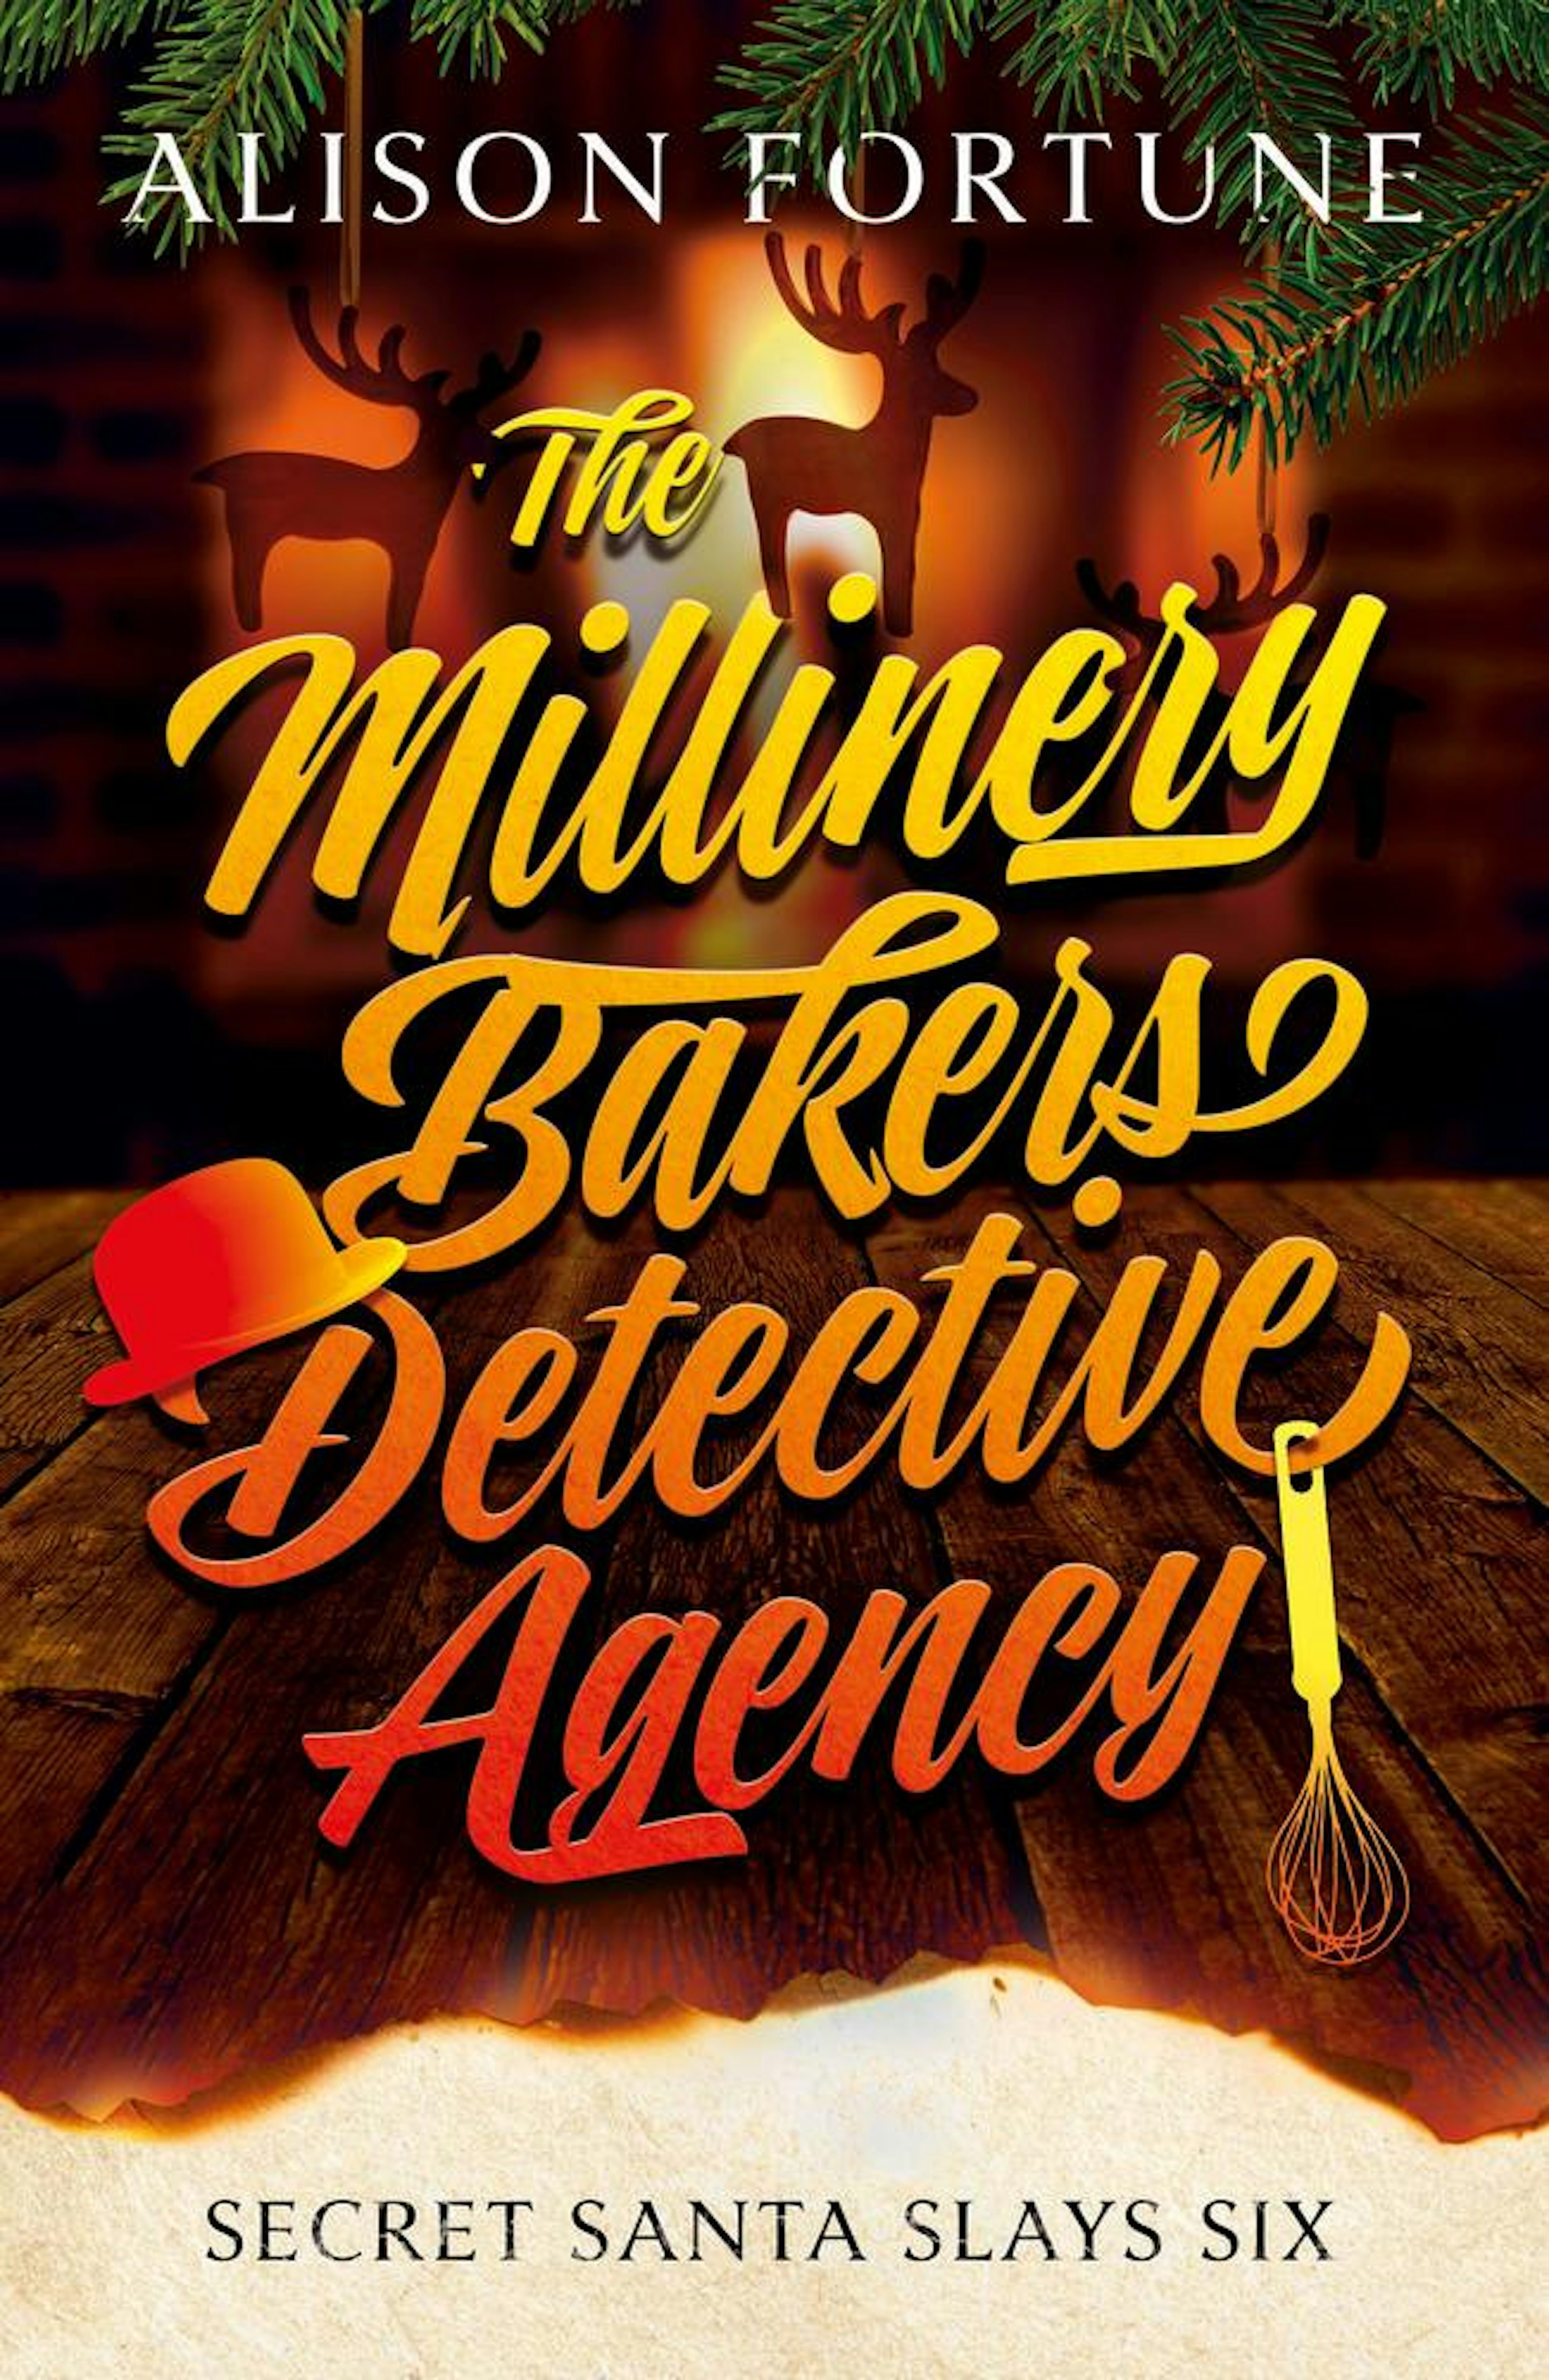 The Millinery Bakers Detective Agency